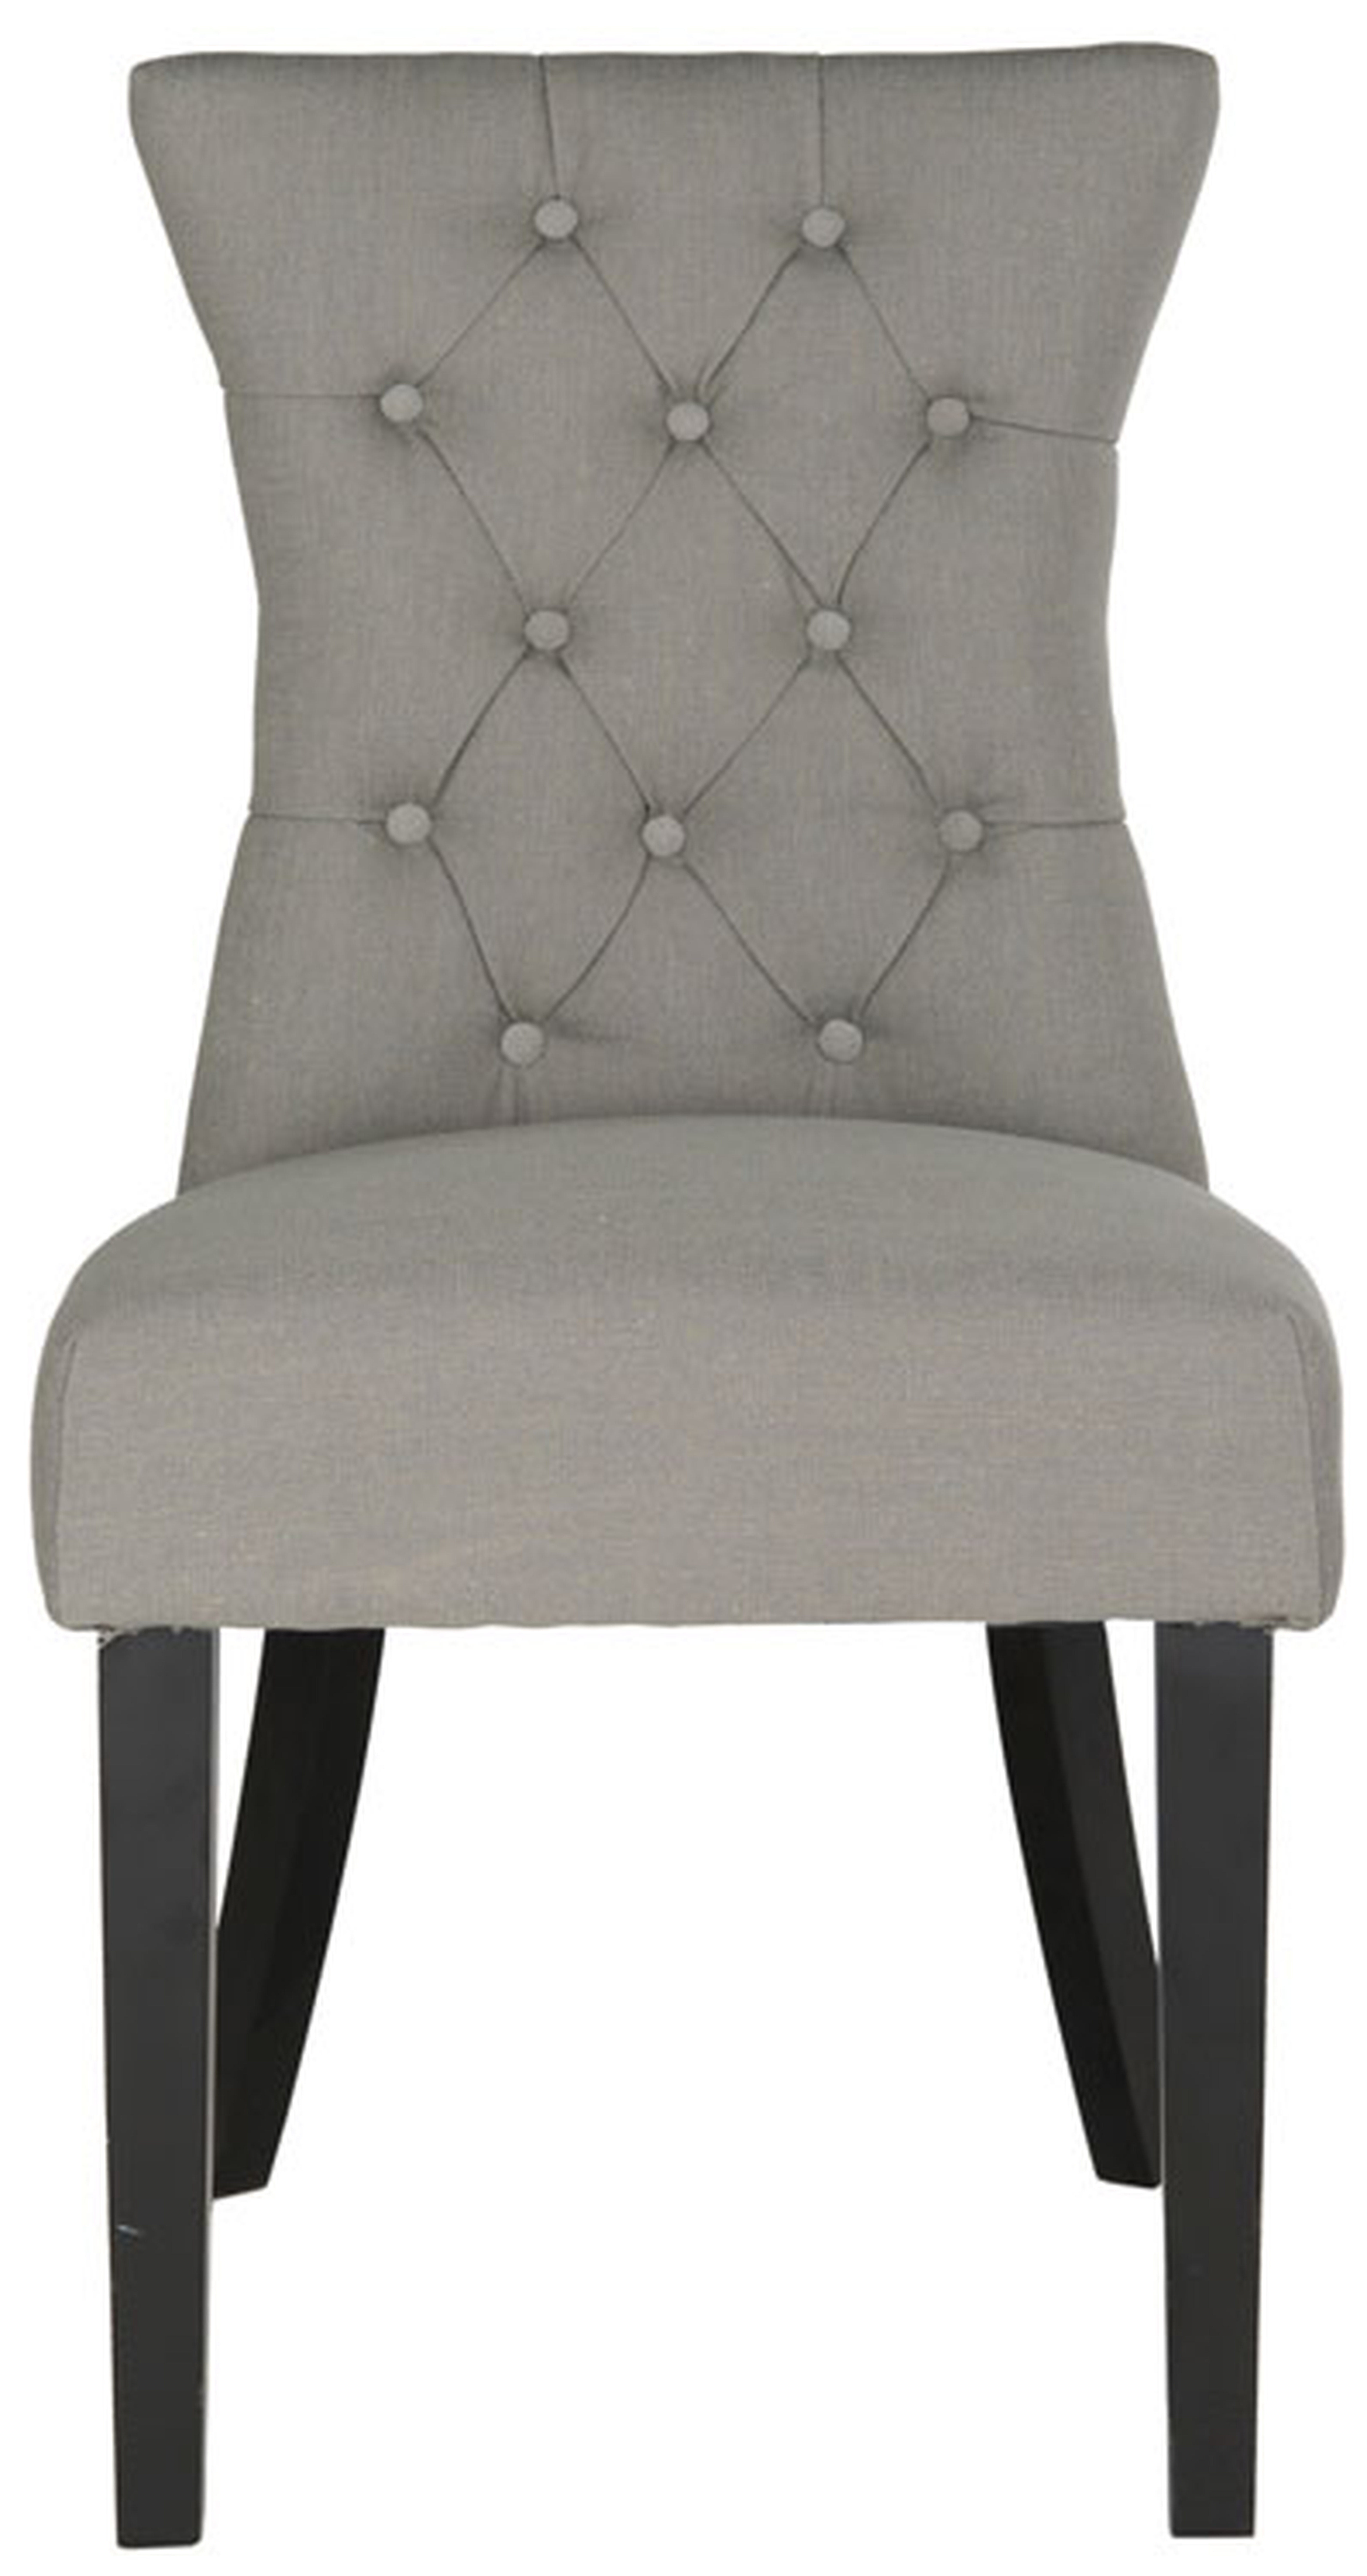 Gretchen 21''H Tufted Side Chair (Set Of 2) - Granite/Black - Arlo Home - Arlo Home